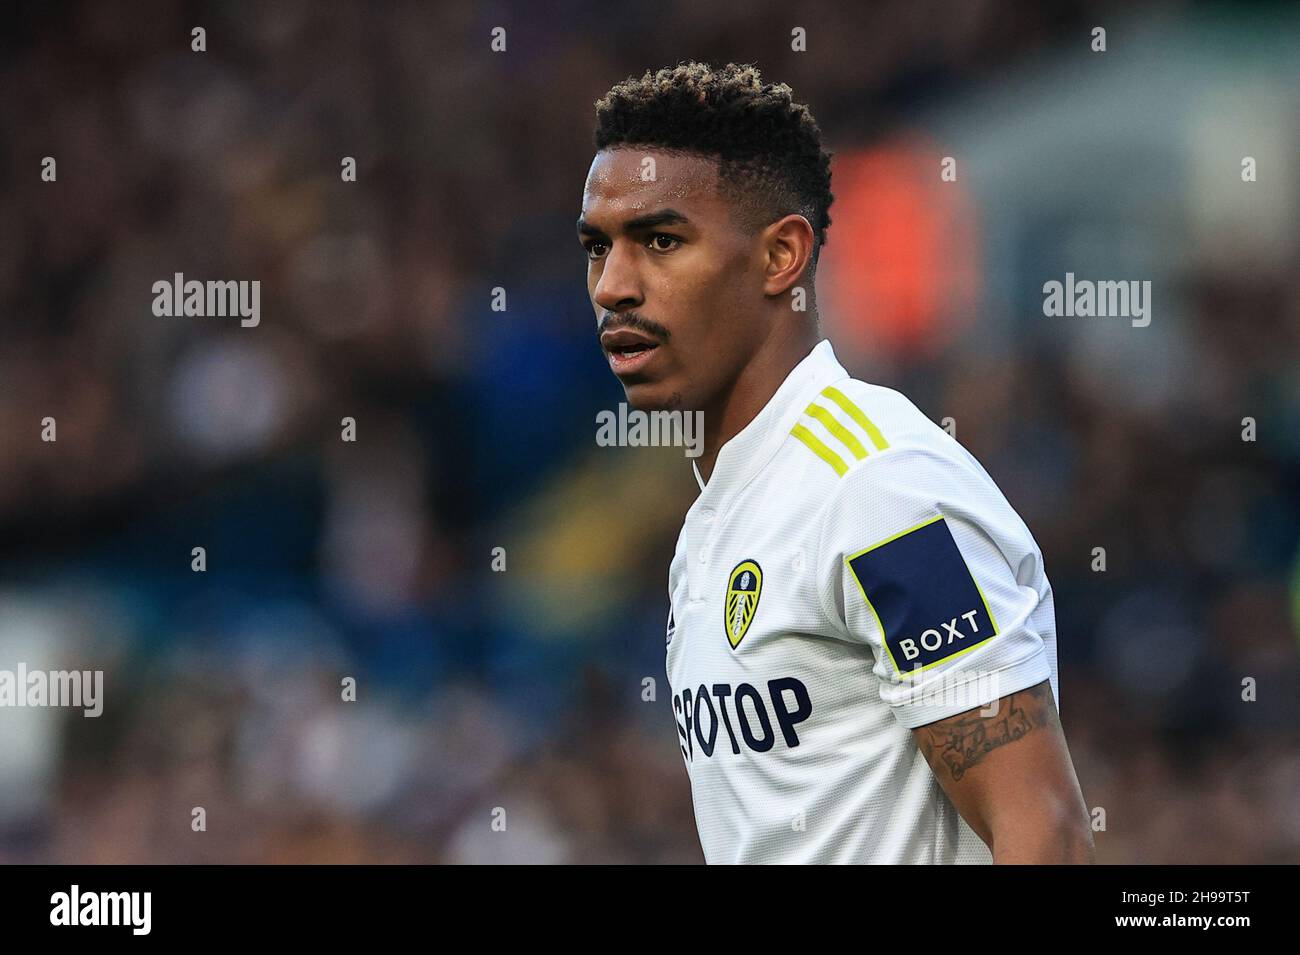 Junior Firpo #3 of Leeds United during the game Stock Photo